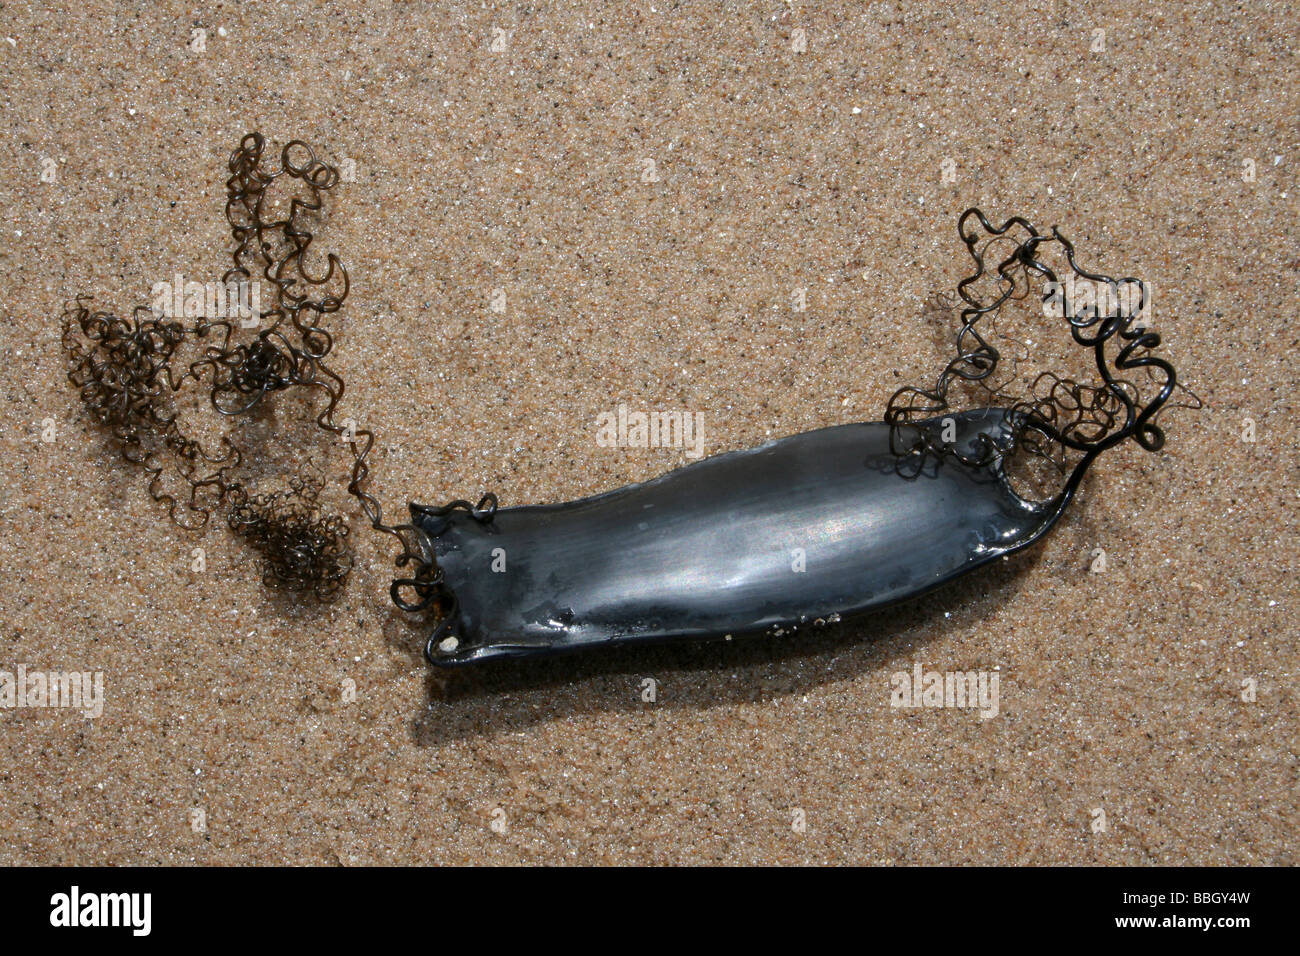 Mermaid's Purse: The Egg Case Of A Lesser Spotted Dogfish Scyliorhinus canicula At New Brighton, The Wirral, Merseyside, UK Stock Photo